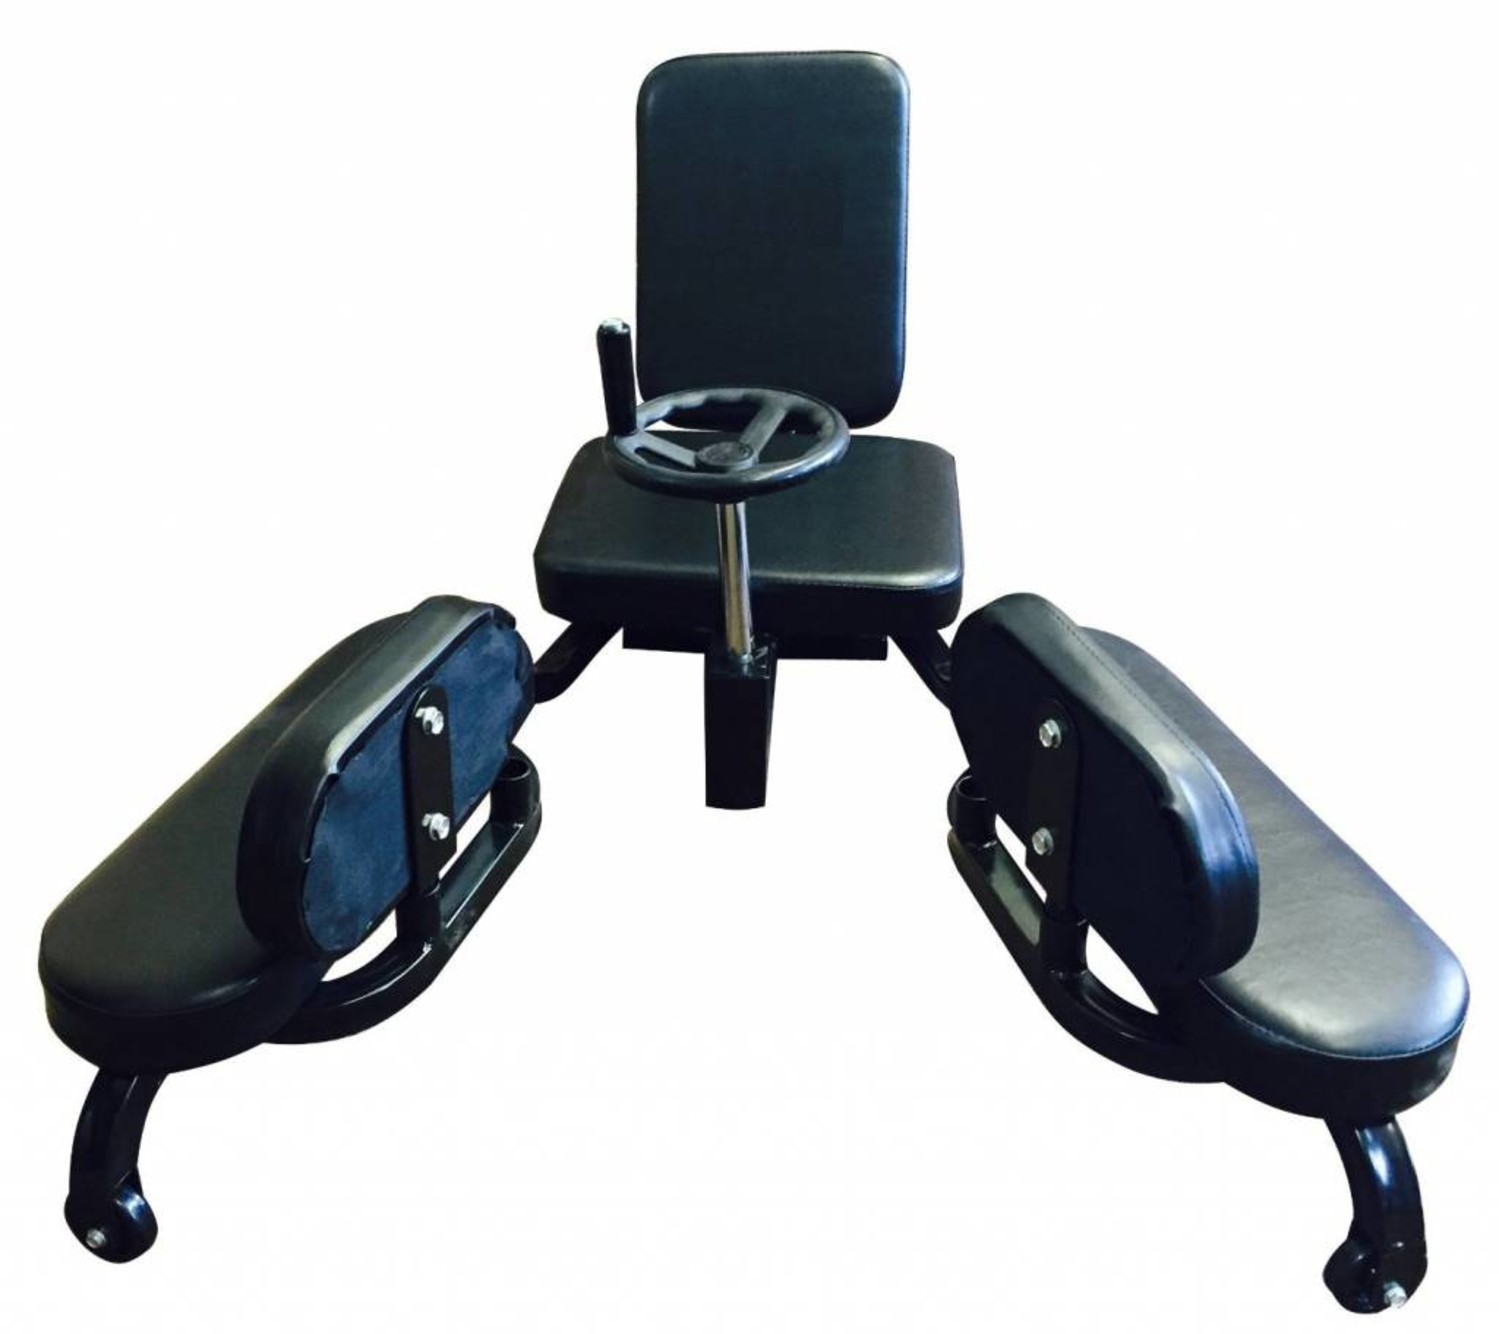 Leg Stretching Machine is the ultimate to improve splits - Enso